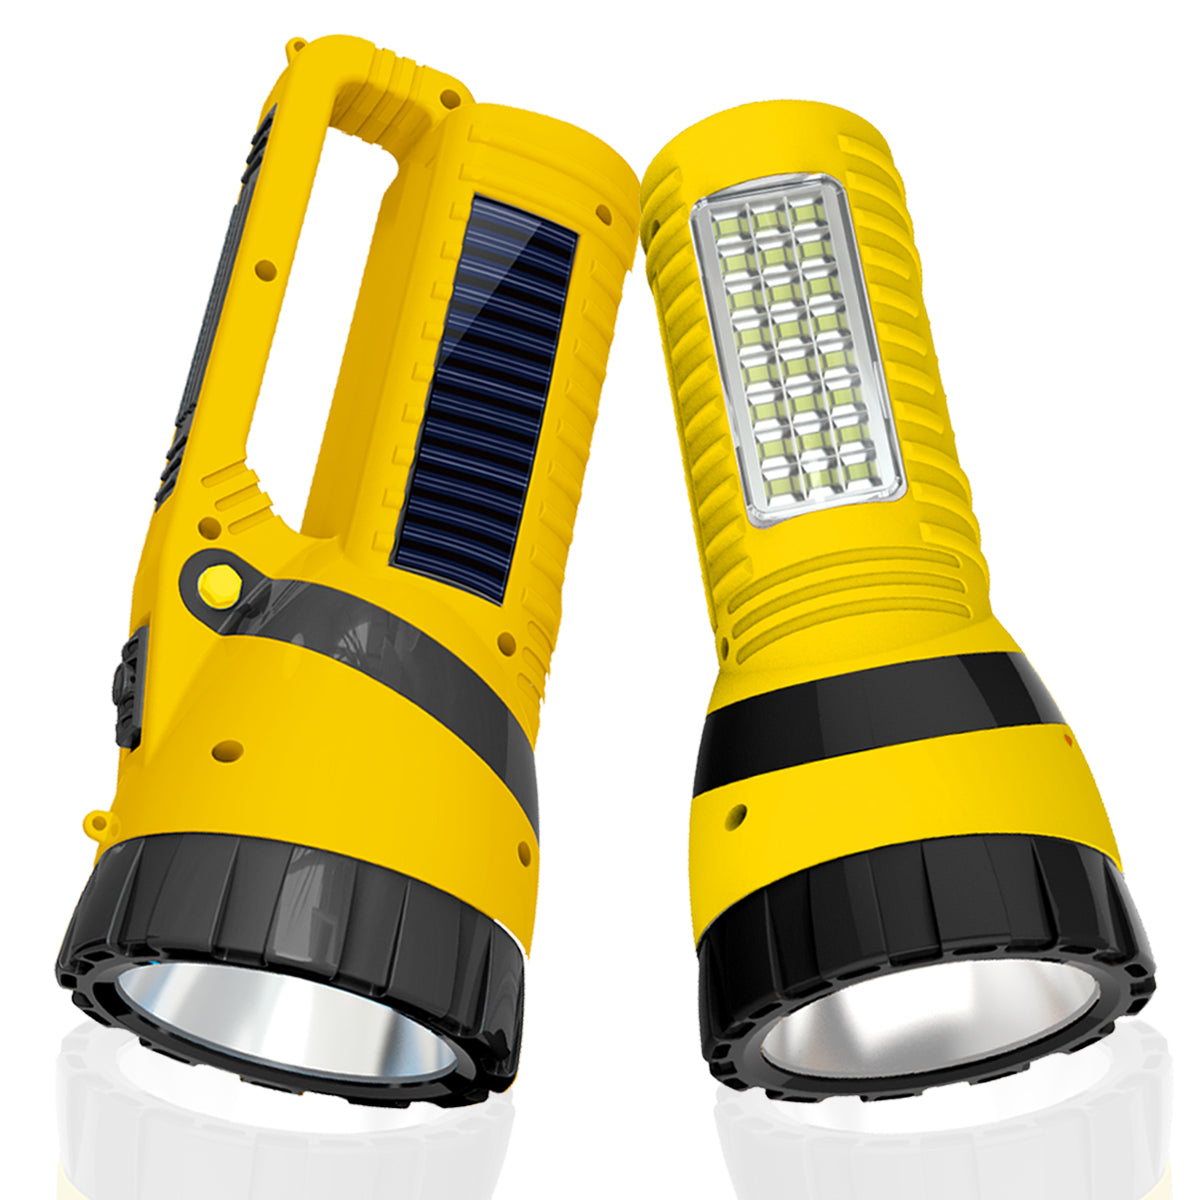 Pick Ur Needs Solar Rechargeable Emergency Long Range Search Torch Light 75 Watts + 24 SMD